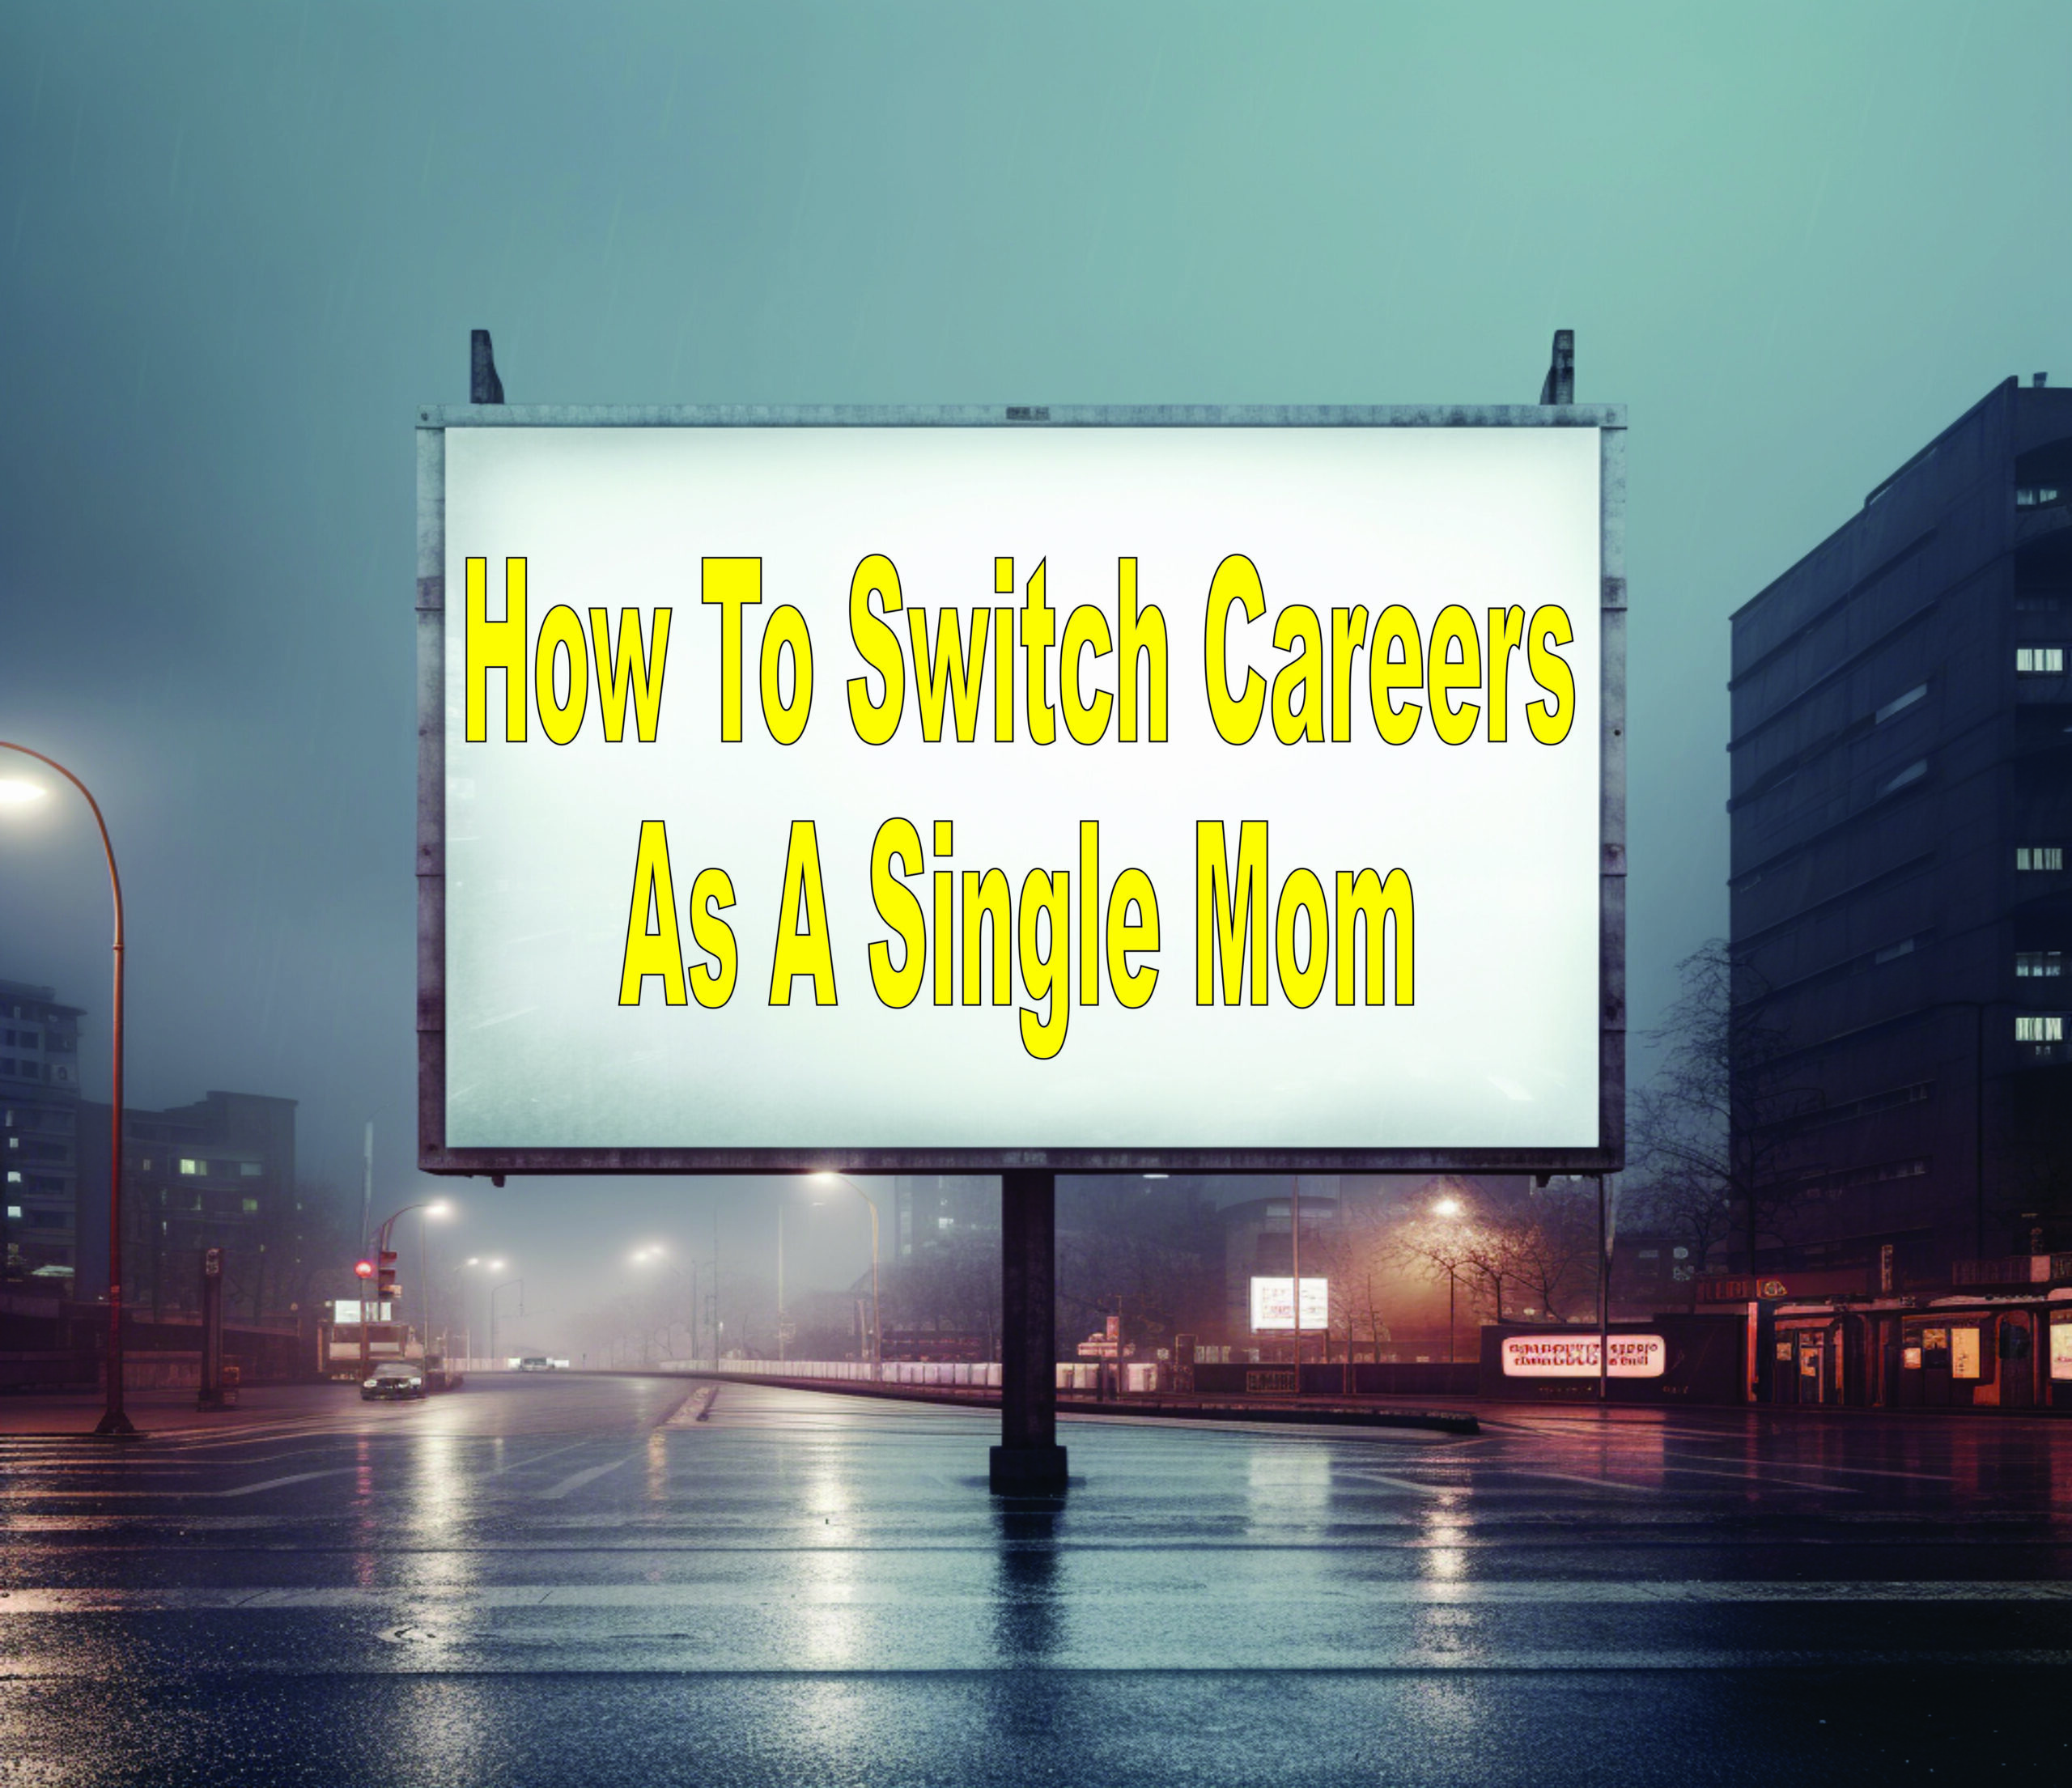 How To Switch Careers As A Single Mom